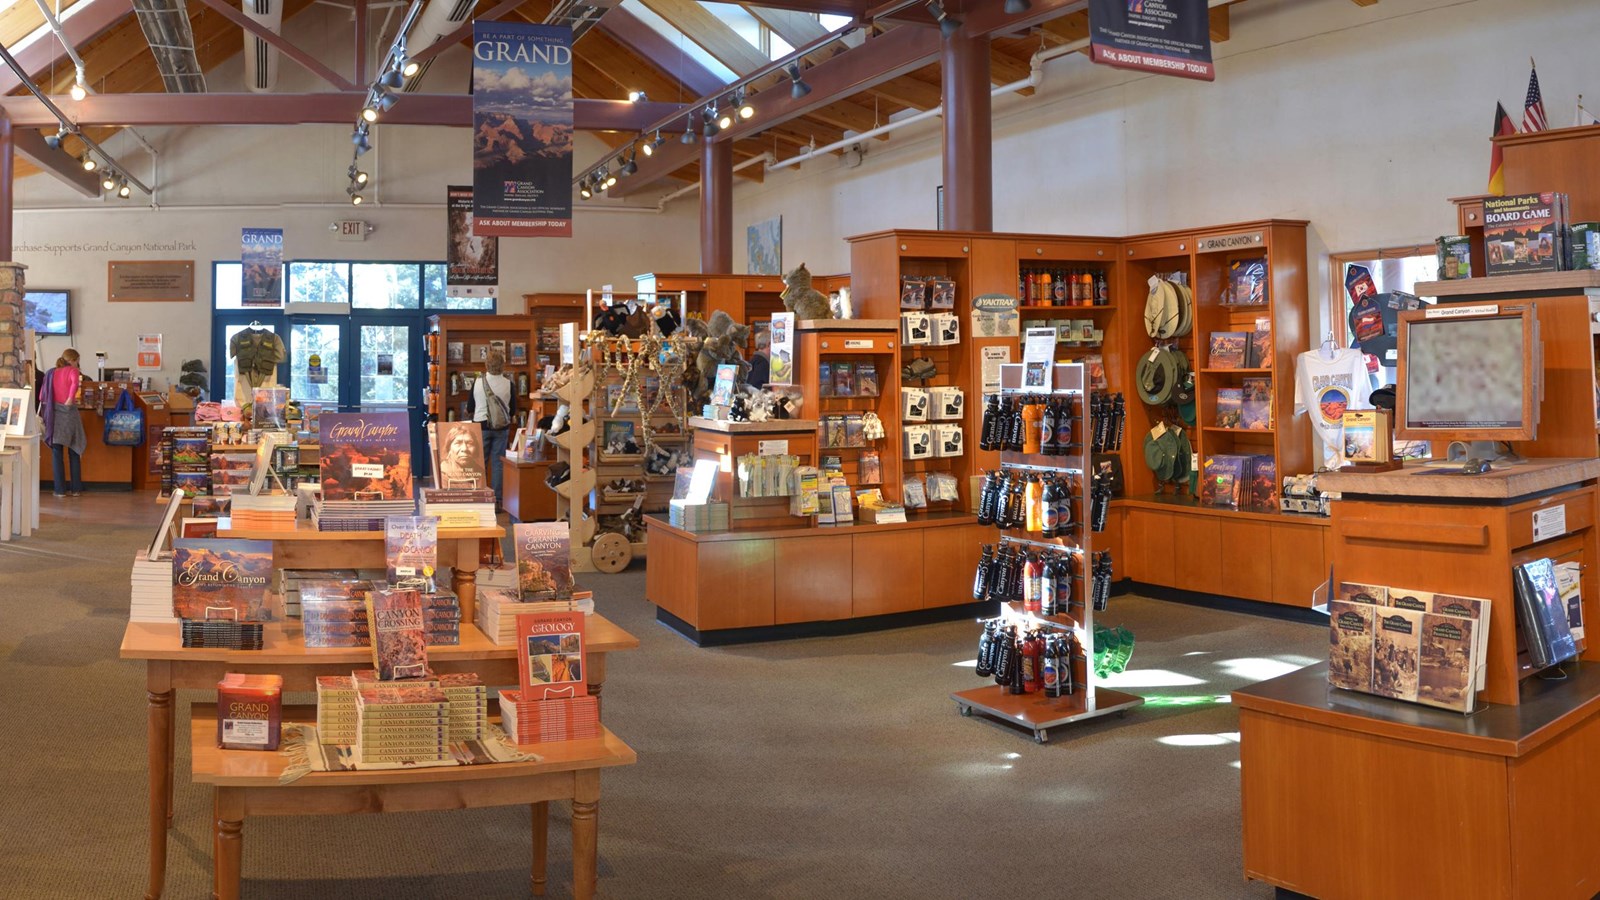 A large indoor space is full of tables and displays featuring books, souvenirs, and gifts.